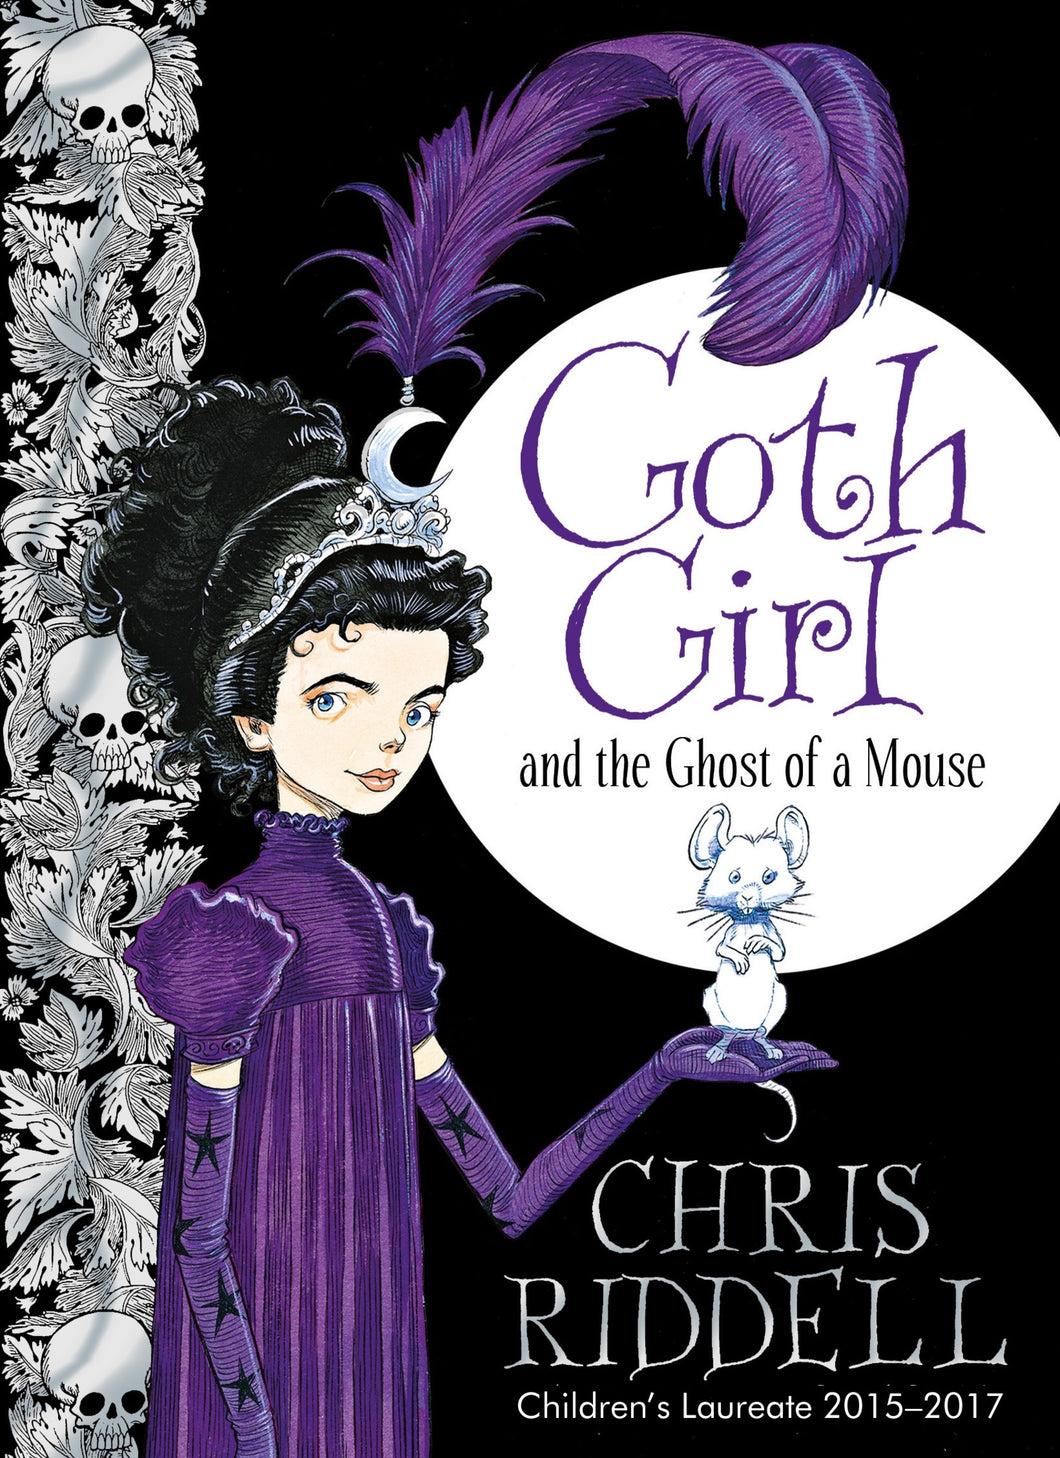 Goth Girl and the Ghost of a Mouse (Goth Girl #1)